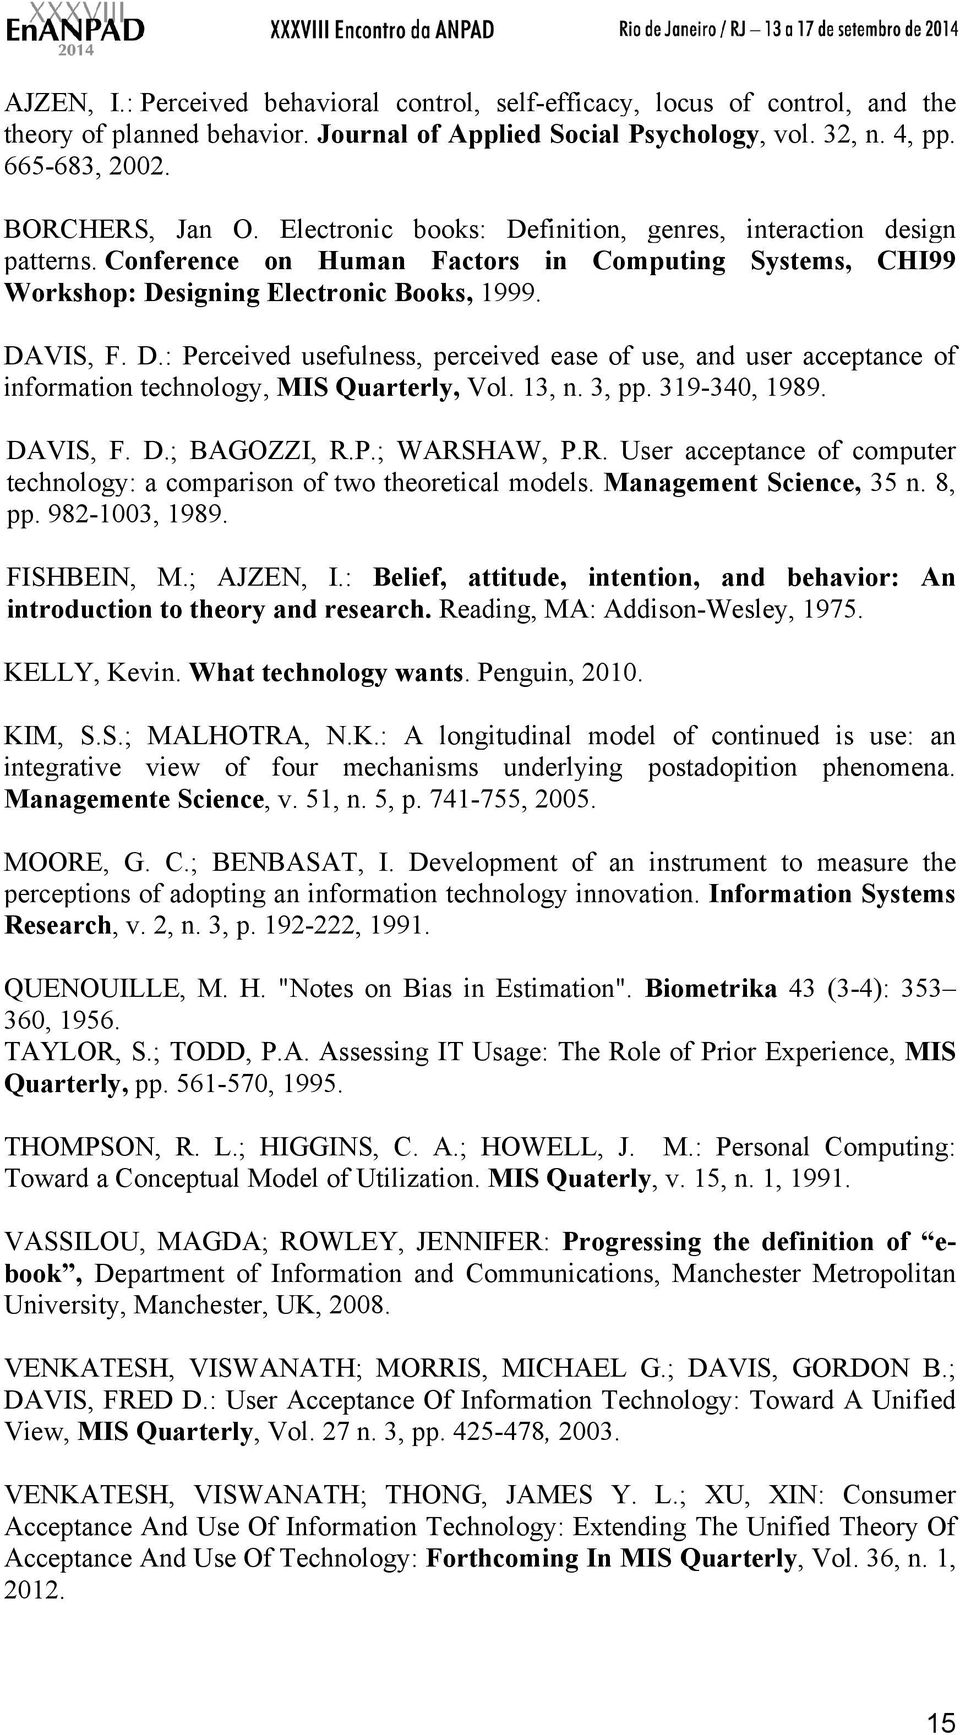 13, n. 3, pp. 319-340, 1989. DAVIS, F. D.; BAGOZZI, R.P.; WARSHAW, P.R. User acceptance of computer technology: a comparison of two theoretical models. Management Science, 35 n. 8, pp. 982-1003, 1989.